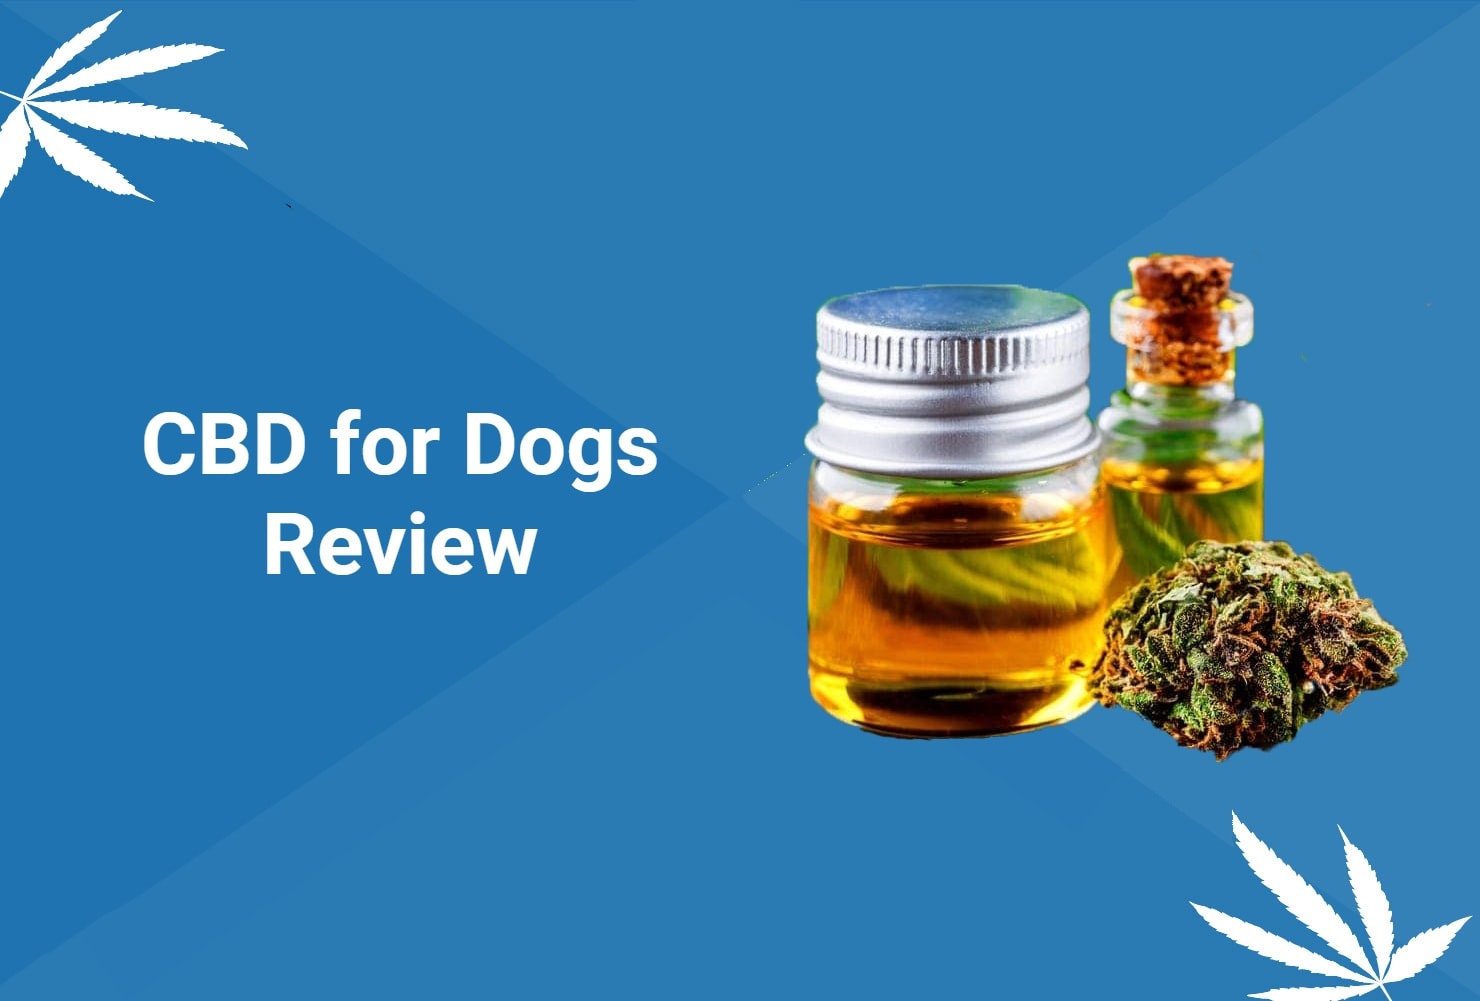 CBD for dogs review